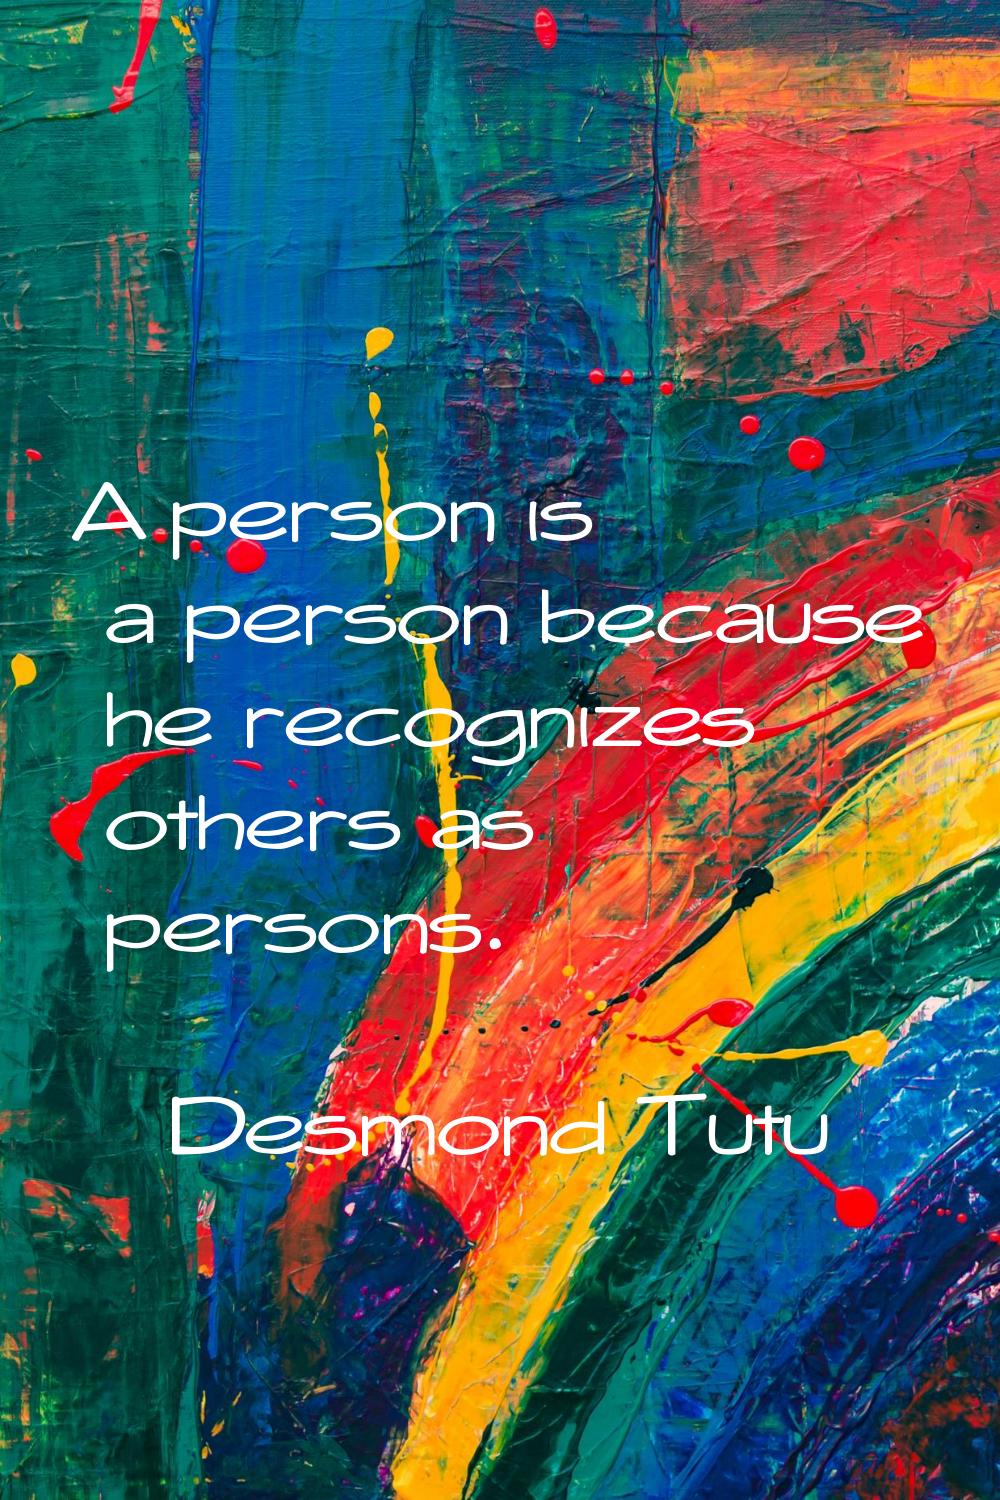 A person is a person because he recognizes others as persons.